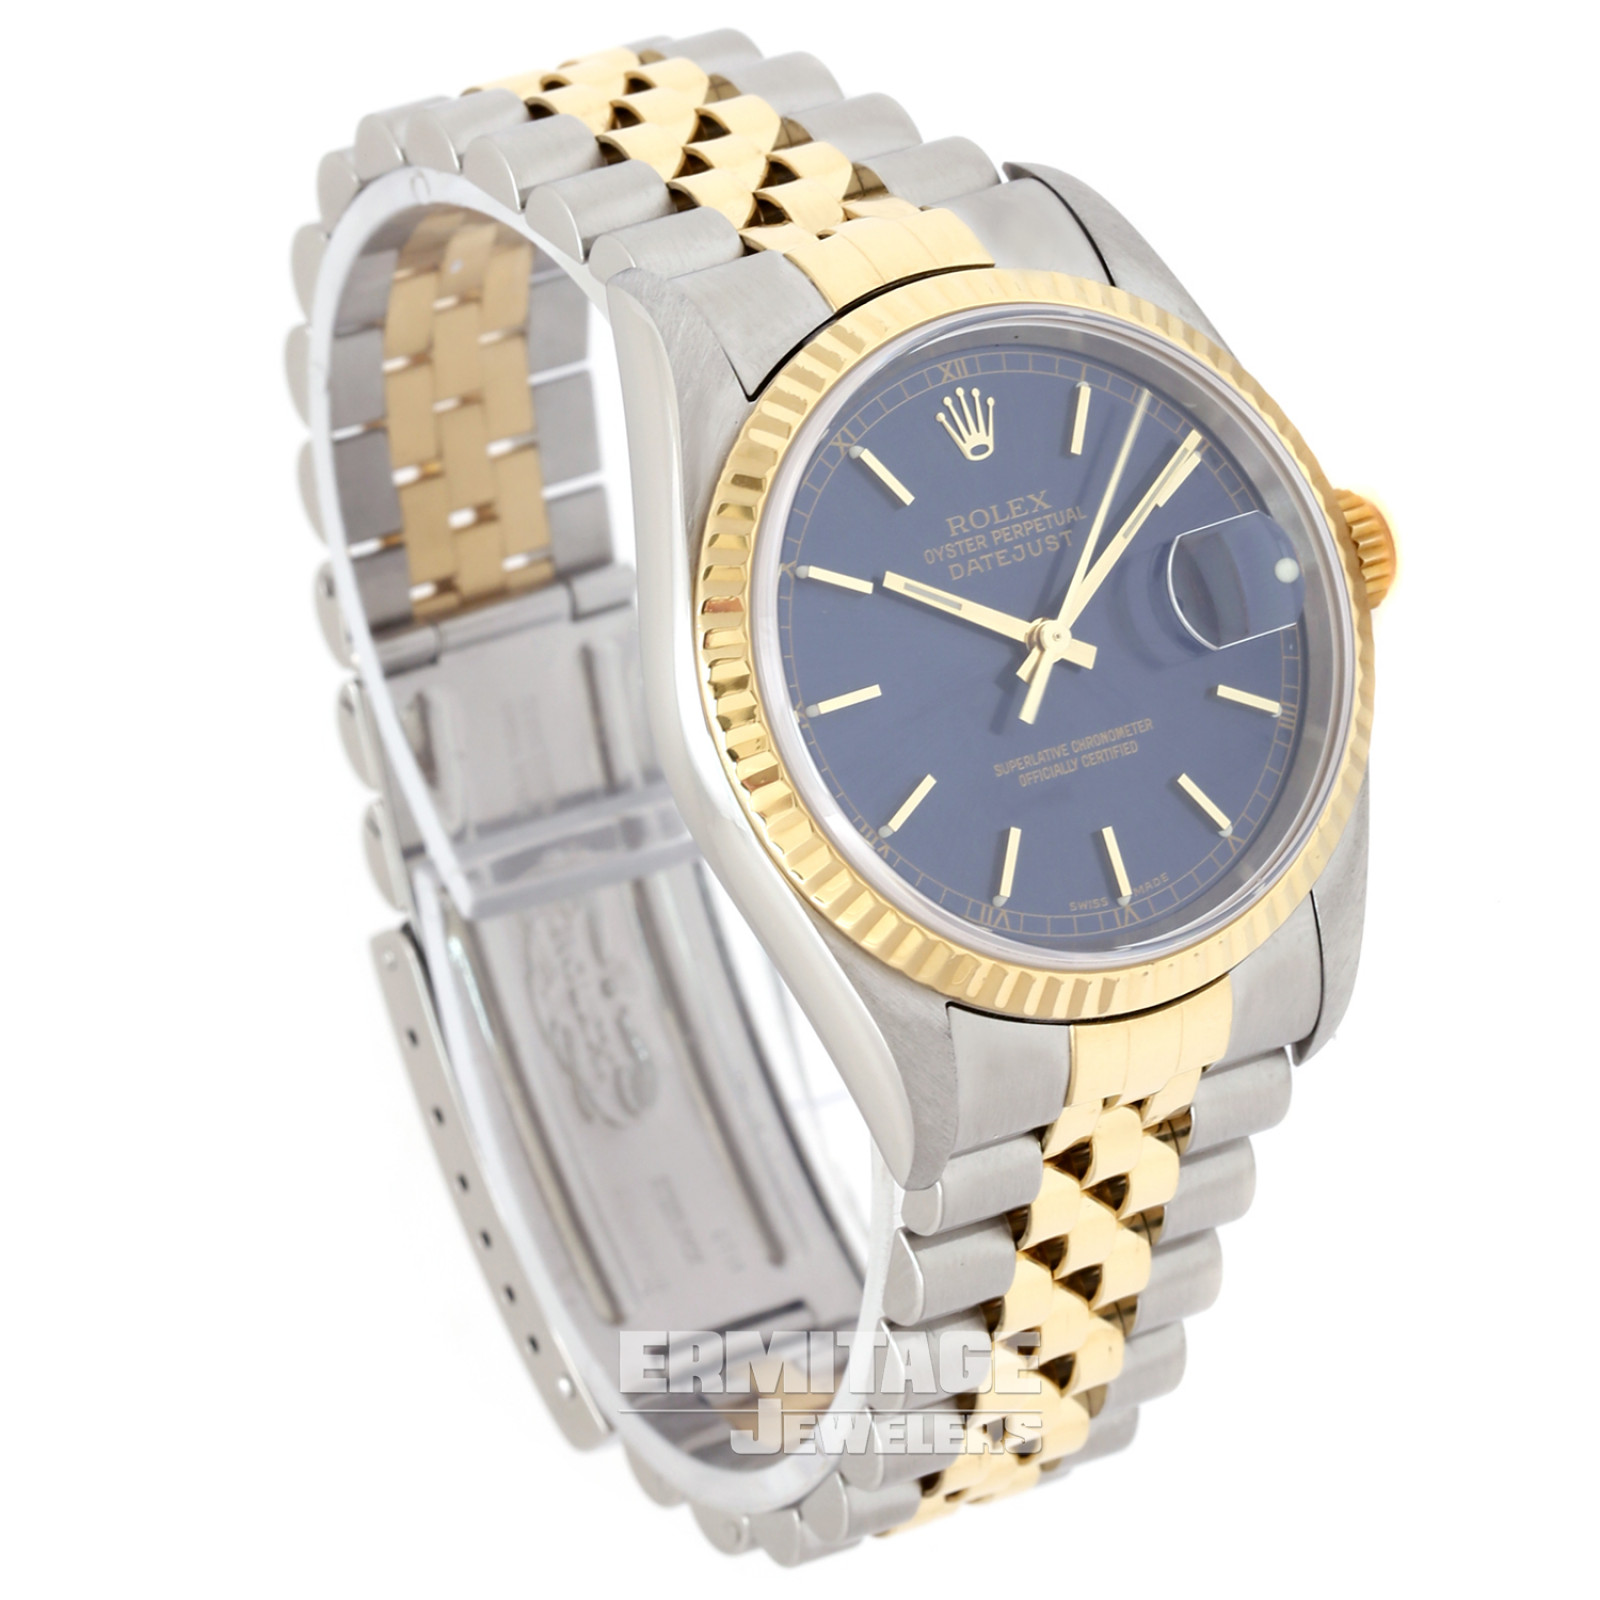 Rolex Datejust 16233 36 mm Fluted Gold Index on Blue Dial